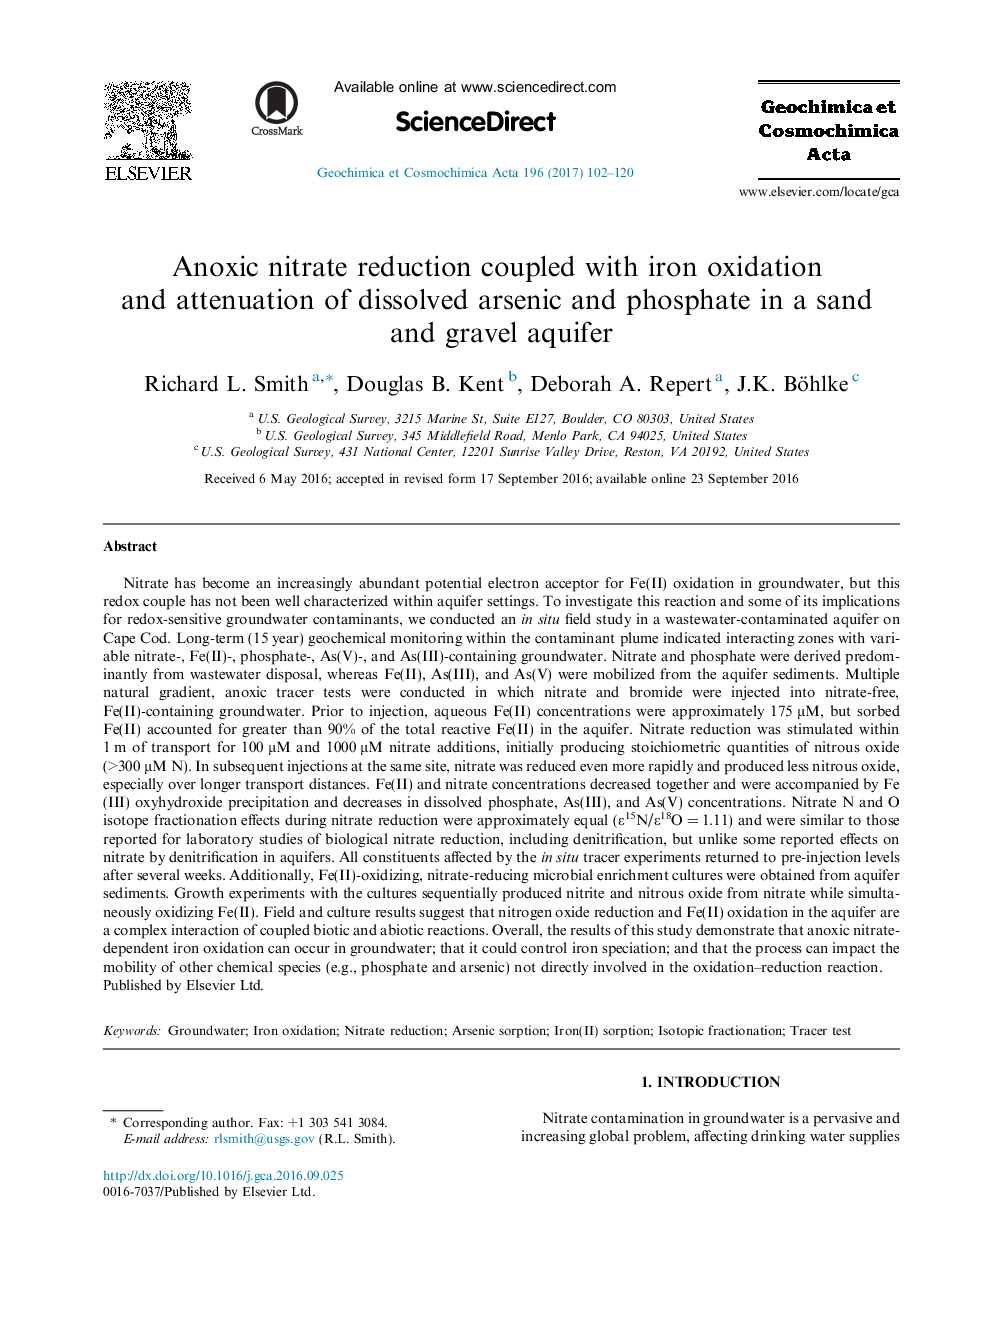 Anoxic nitrate reduction coupled with iron oxidation and attenuation of dissolved arsenic and phosphate in a sand and gravel aquifer